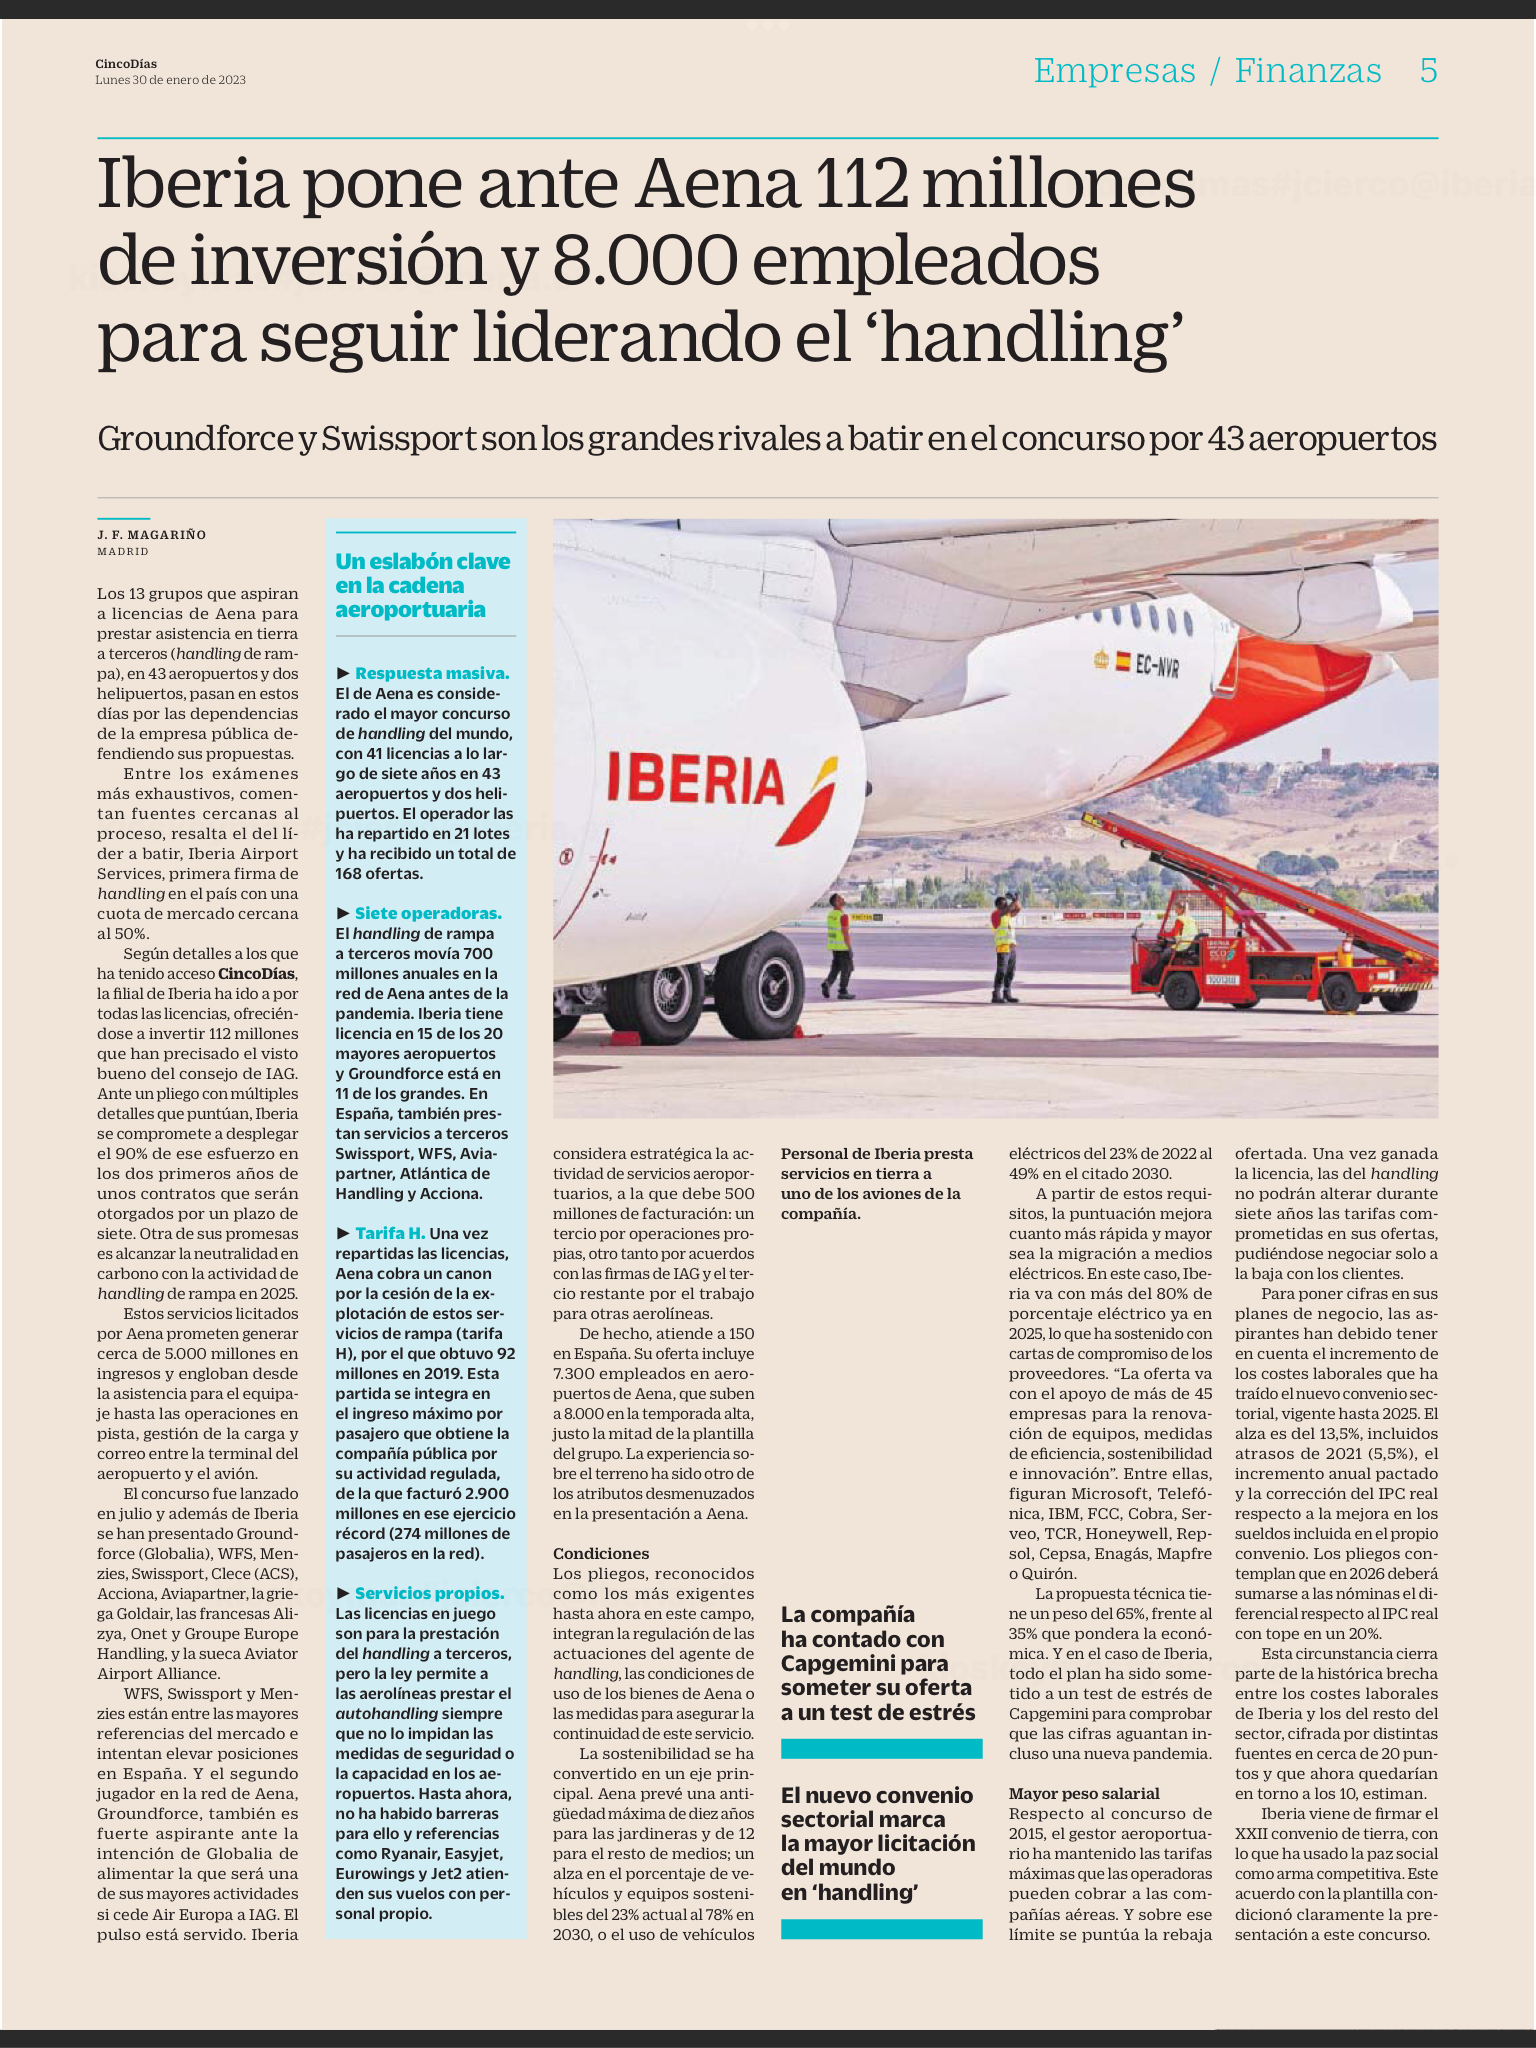 “IBERIA AIRPORT SERVICES WANTS TO CONTINUE LEADING HANDLING”